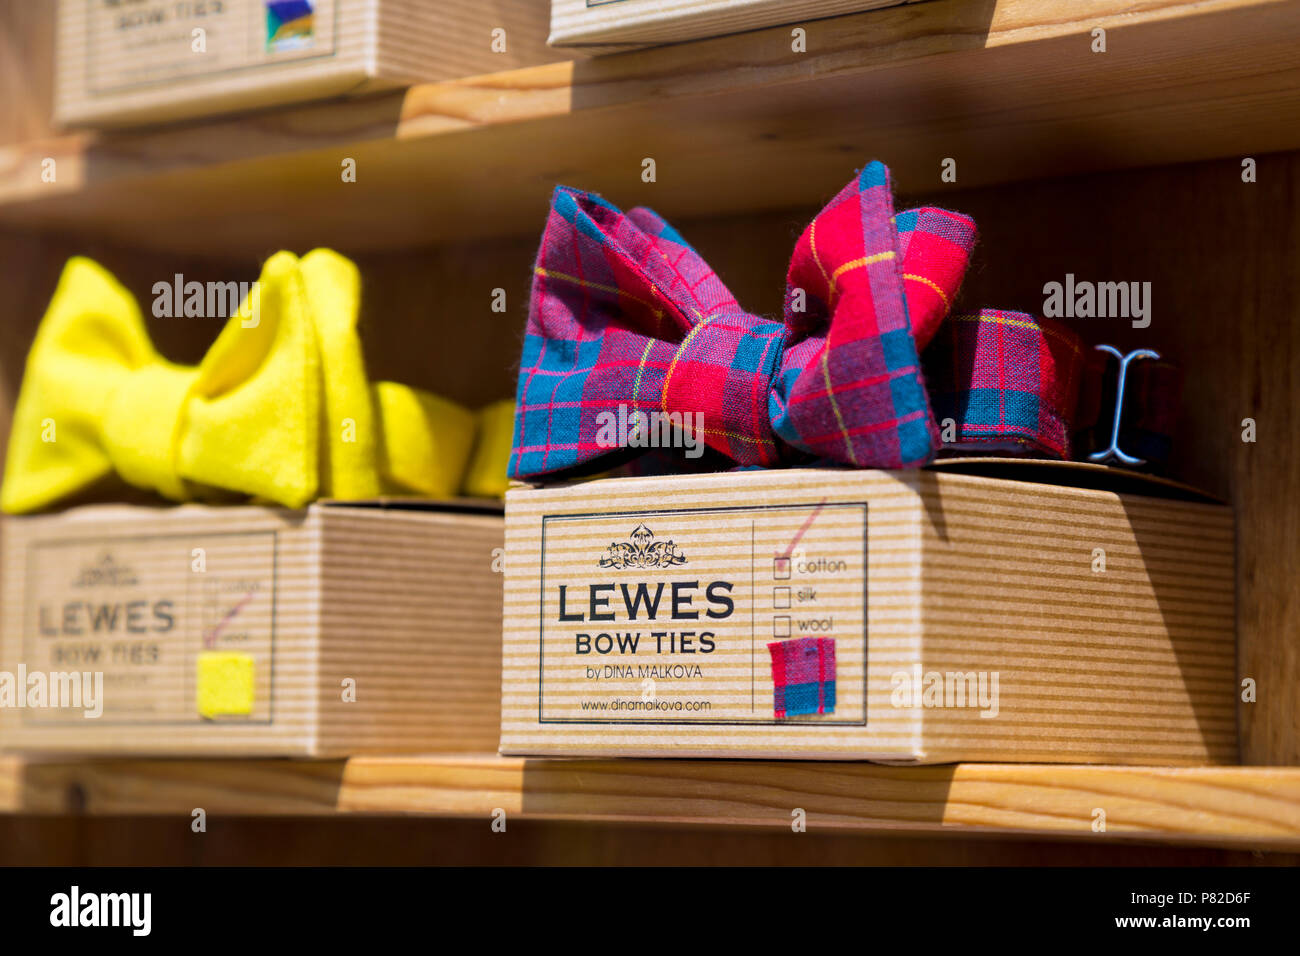 Fun and playful bow ties on display in Lewes, UK Stock Photo